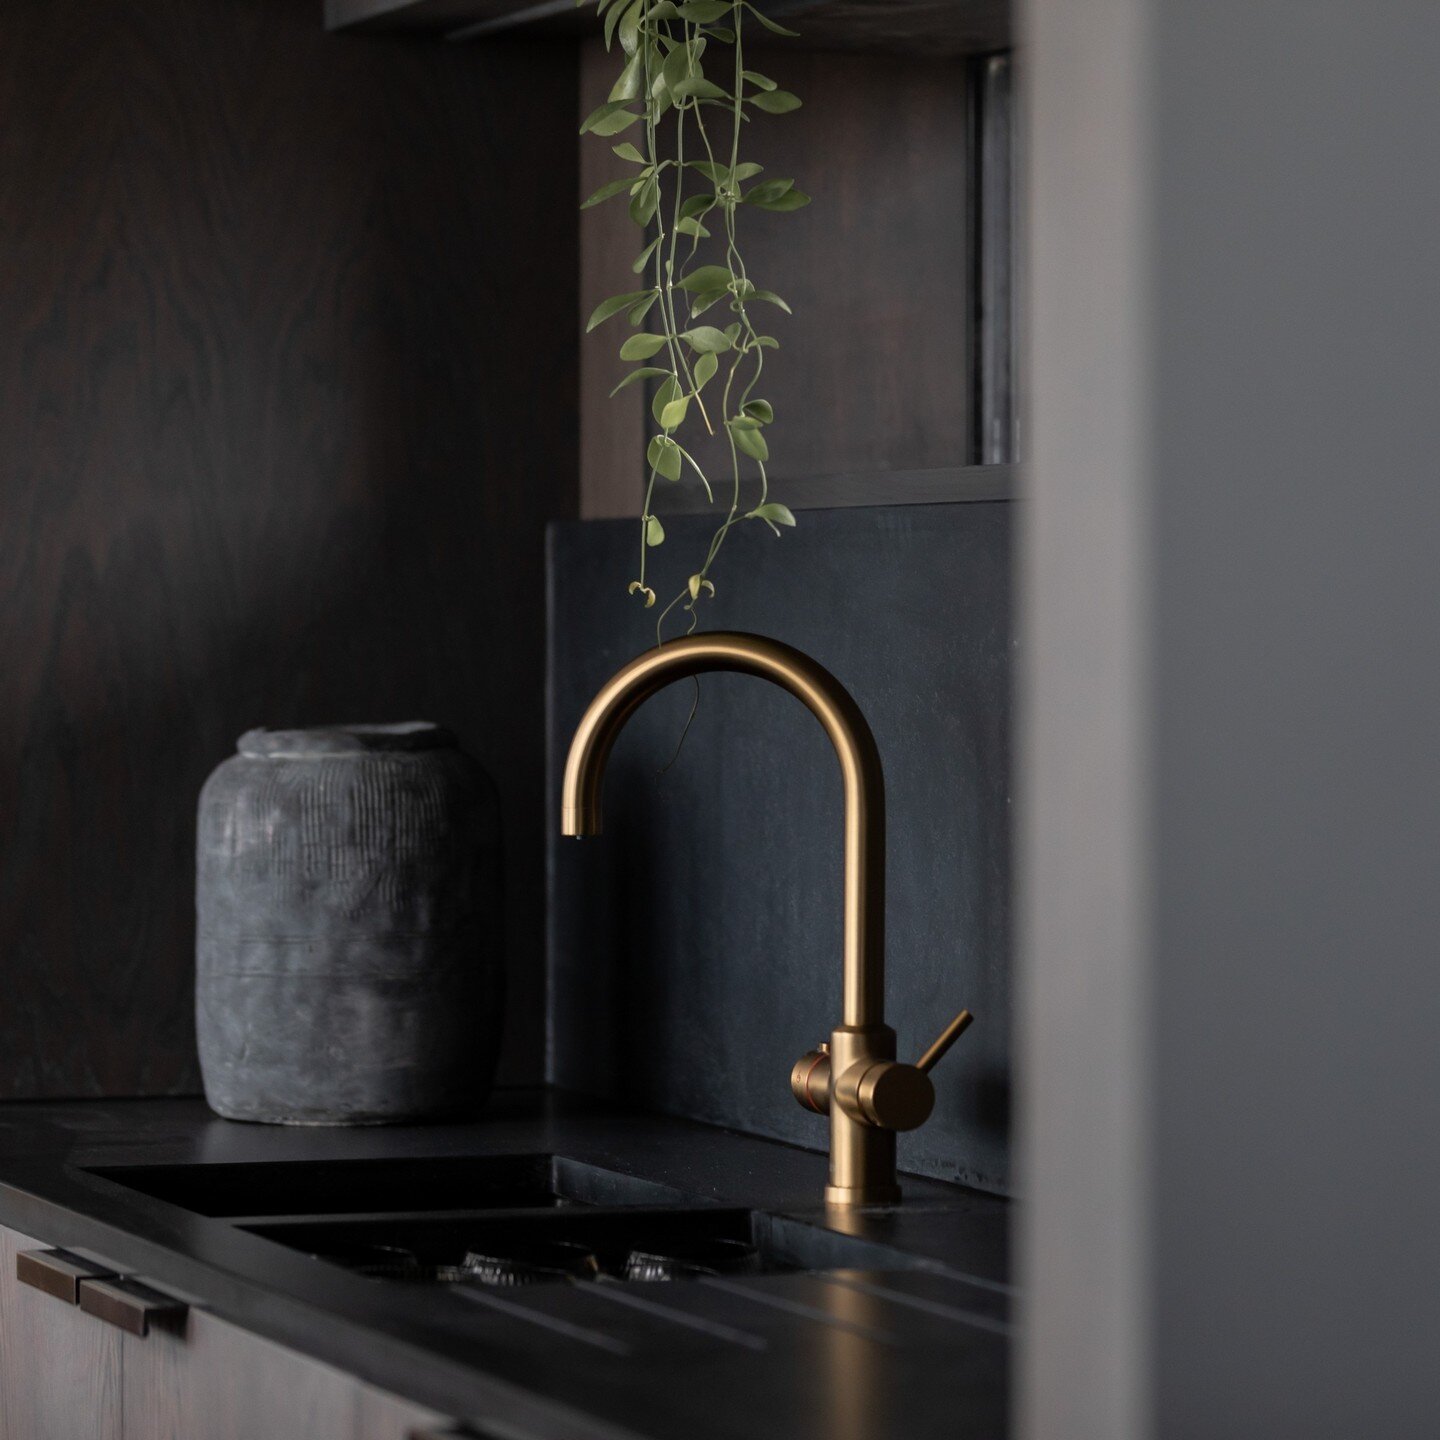 Beautifully blending dark fittings create a contemporary kitchen statement at Koto House whilst the @lussostone brushed brass tap acts as an elegant focal point.